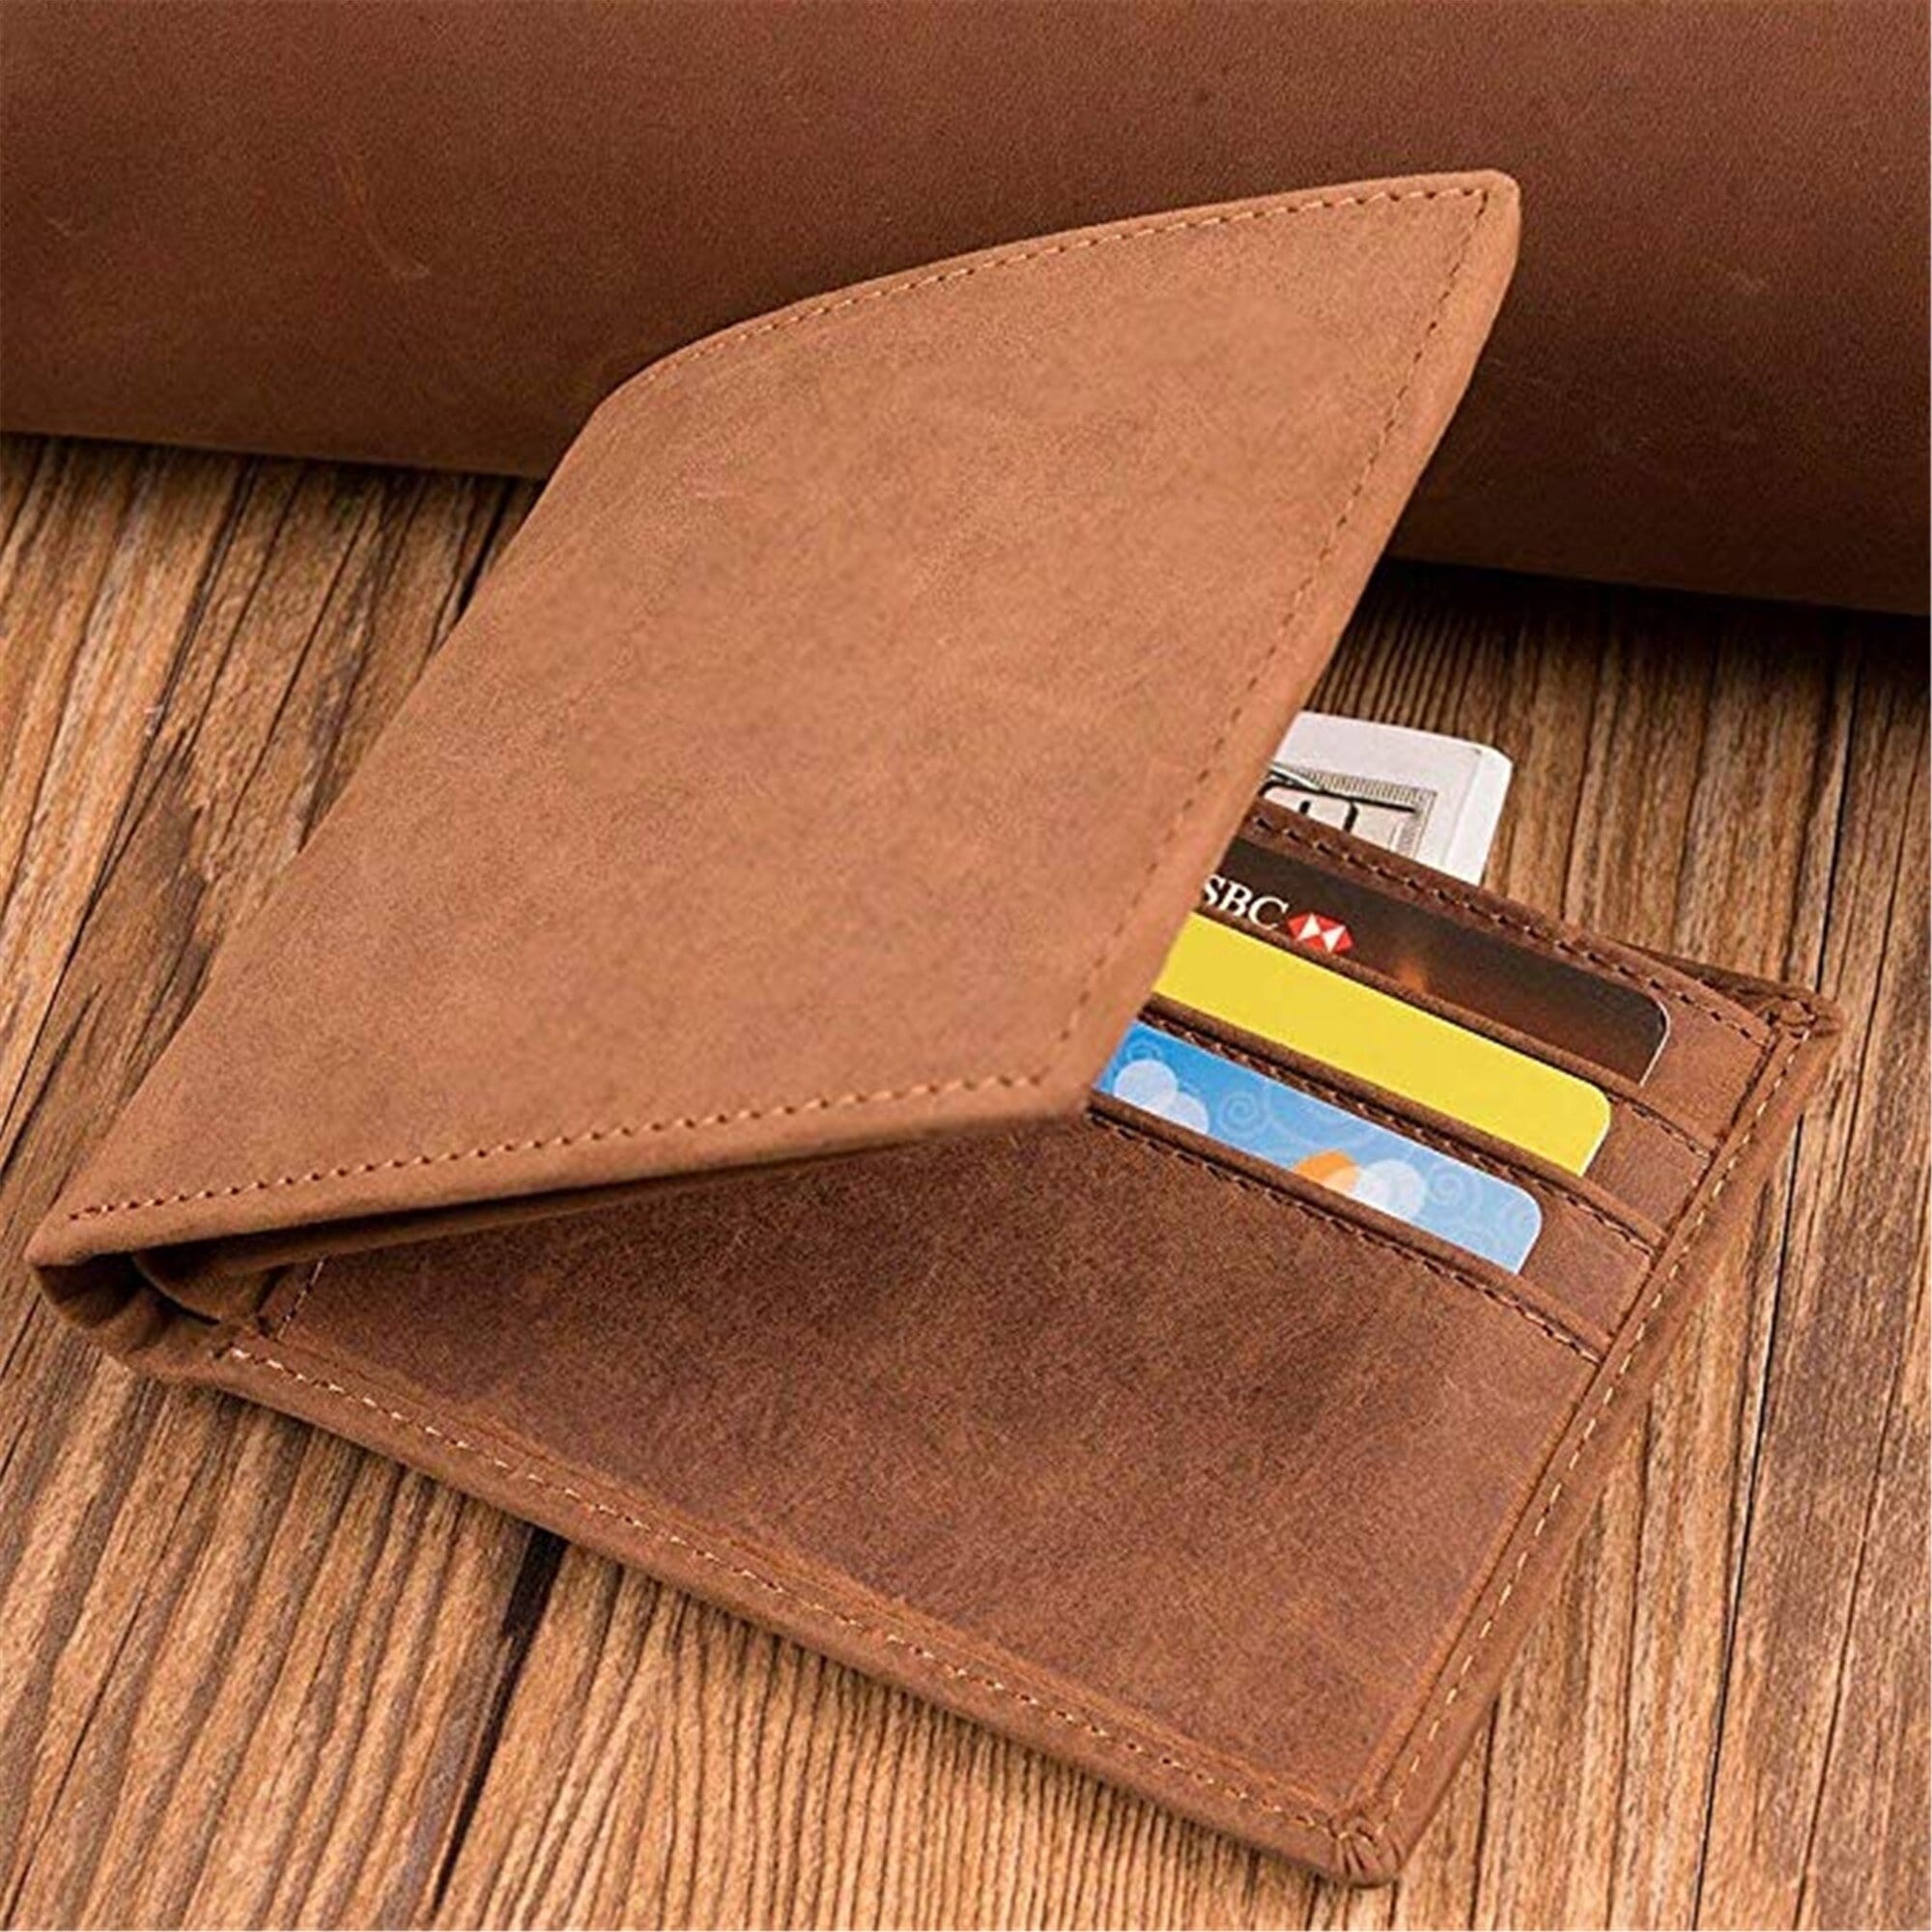 Wallets To My Son - I Love You So Much Bifold Leather Wallet Gift Card GiveMe-Gifts